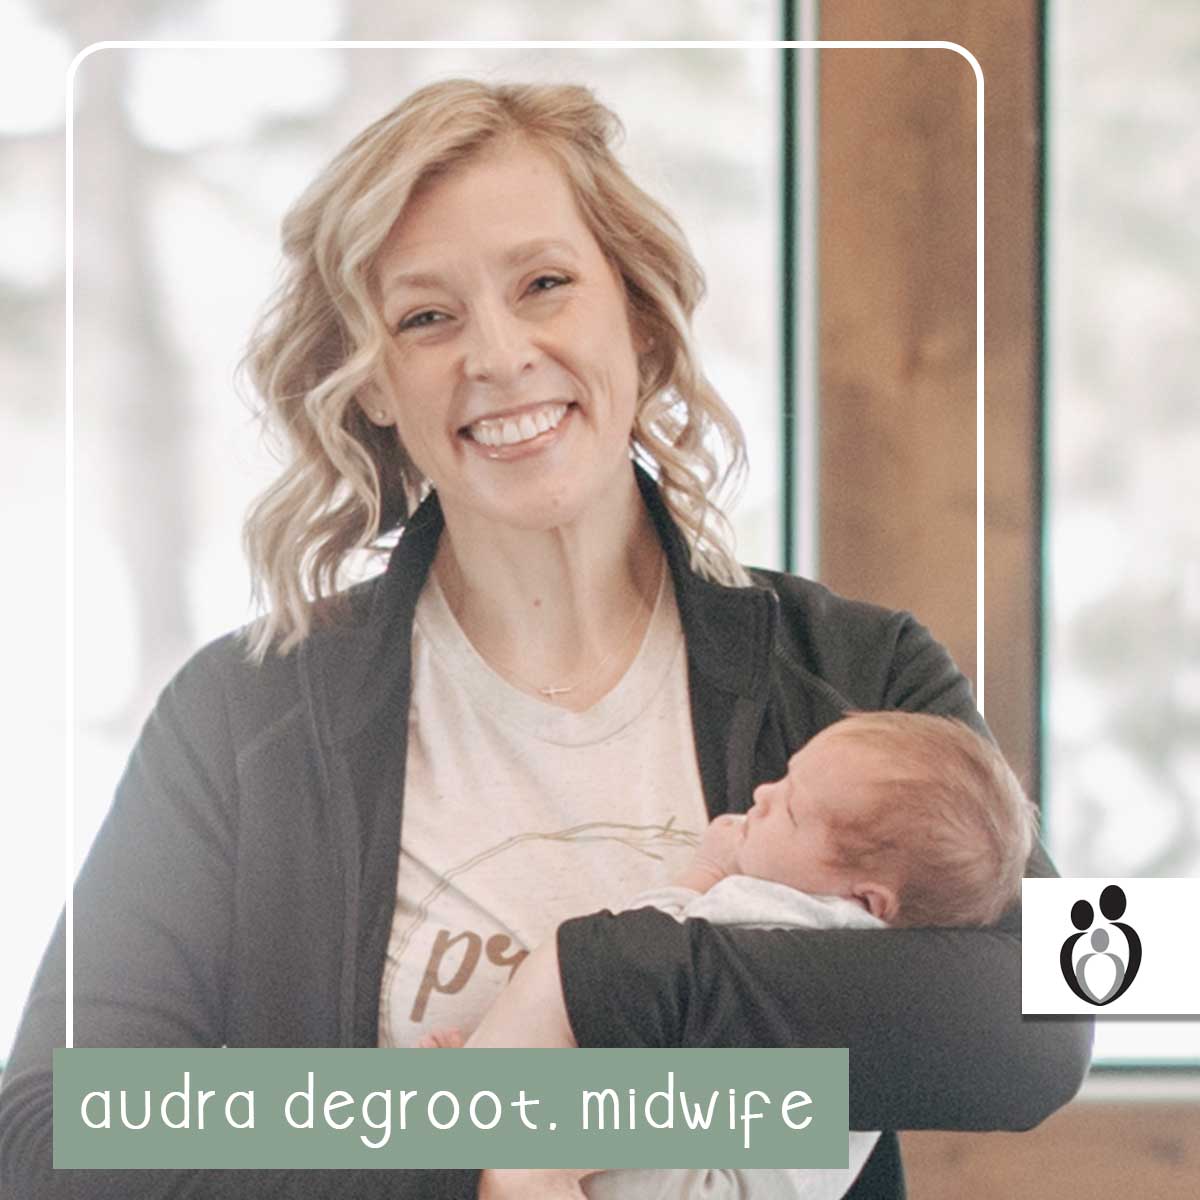 Midwife Audra Degroot, CNM, ARNP, in Sioux Center, IA | Promise Community Health Center in Sioux Center, Iowa | Midwives in northwest Iowa, Midwives in southeast South Dakota, Midwives in southwest Minnesota | Midwives in Sioux Falls South Dakota, Midwives in Beresford South Dakota, Midwives in Sioux City IA, Midwives in LeMars IA, Midwives in Worthington MN, Midwives in Iowa, Midwives in South Dakota, Midwives in Minnesota